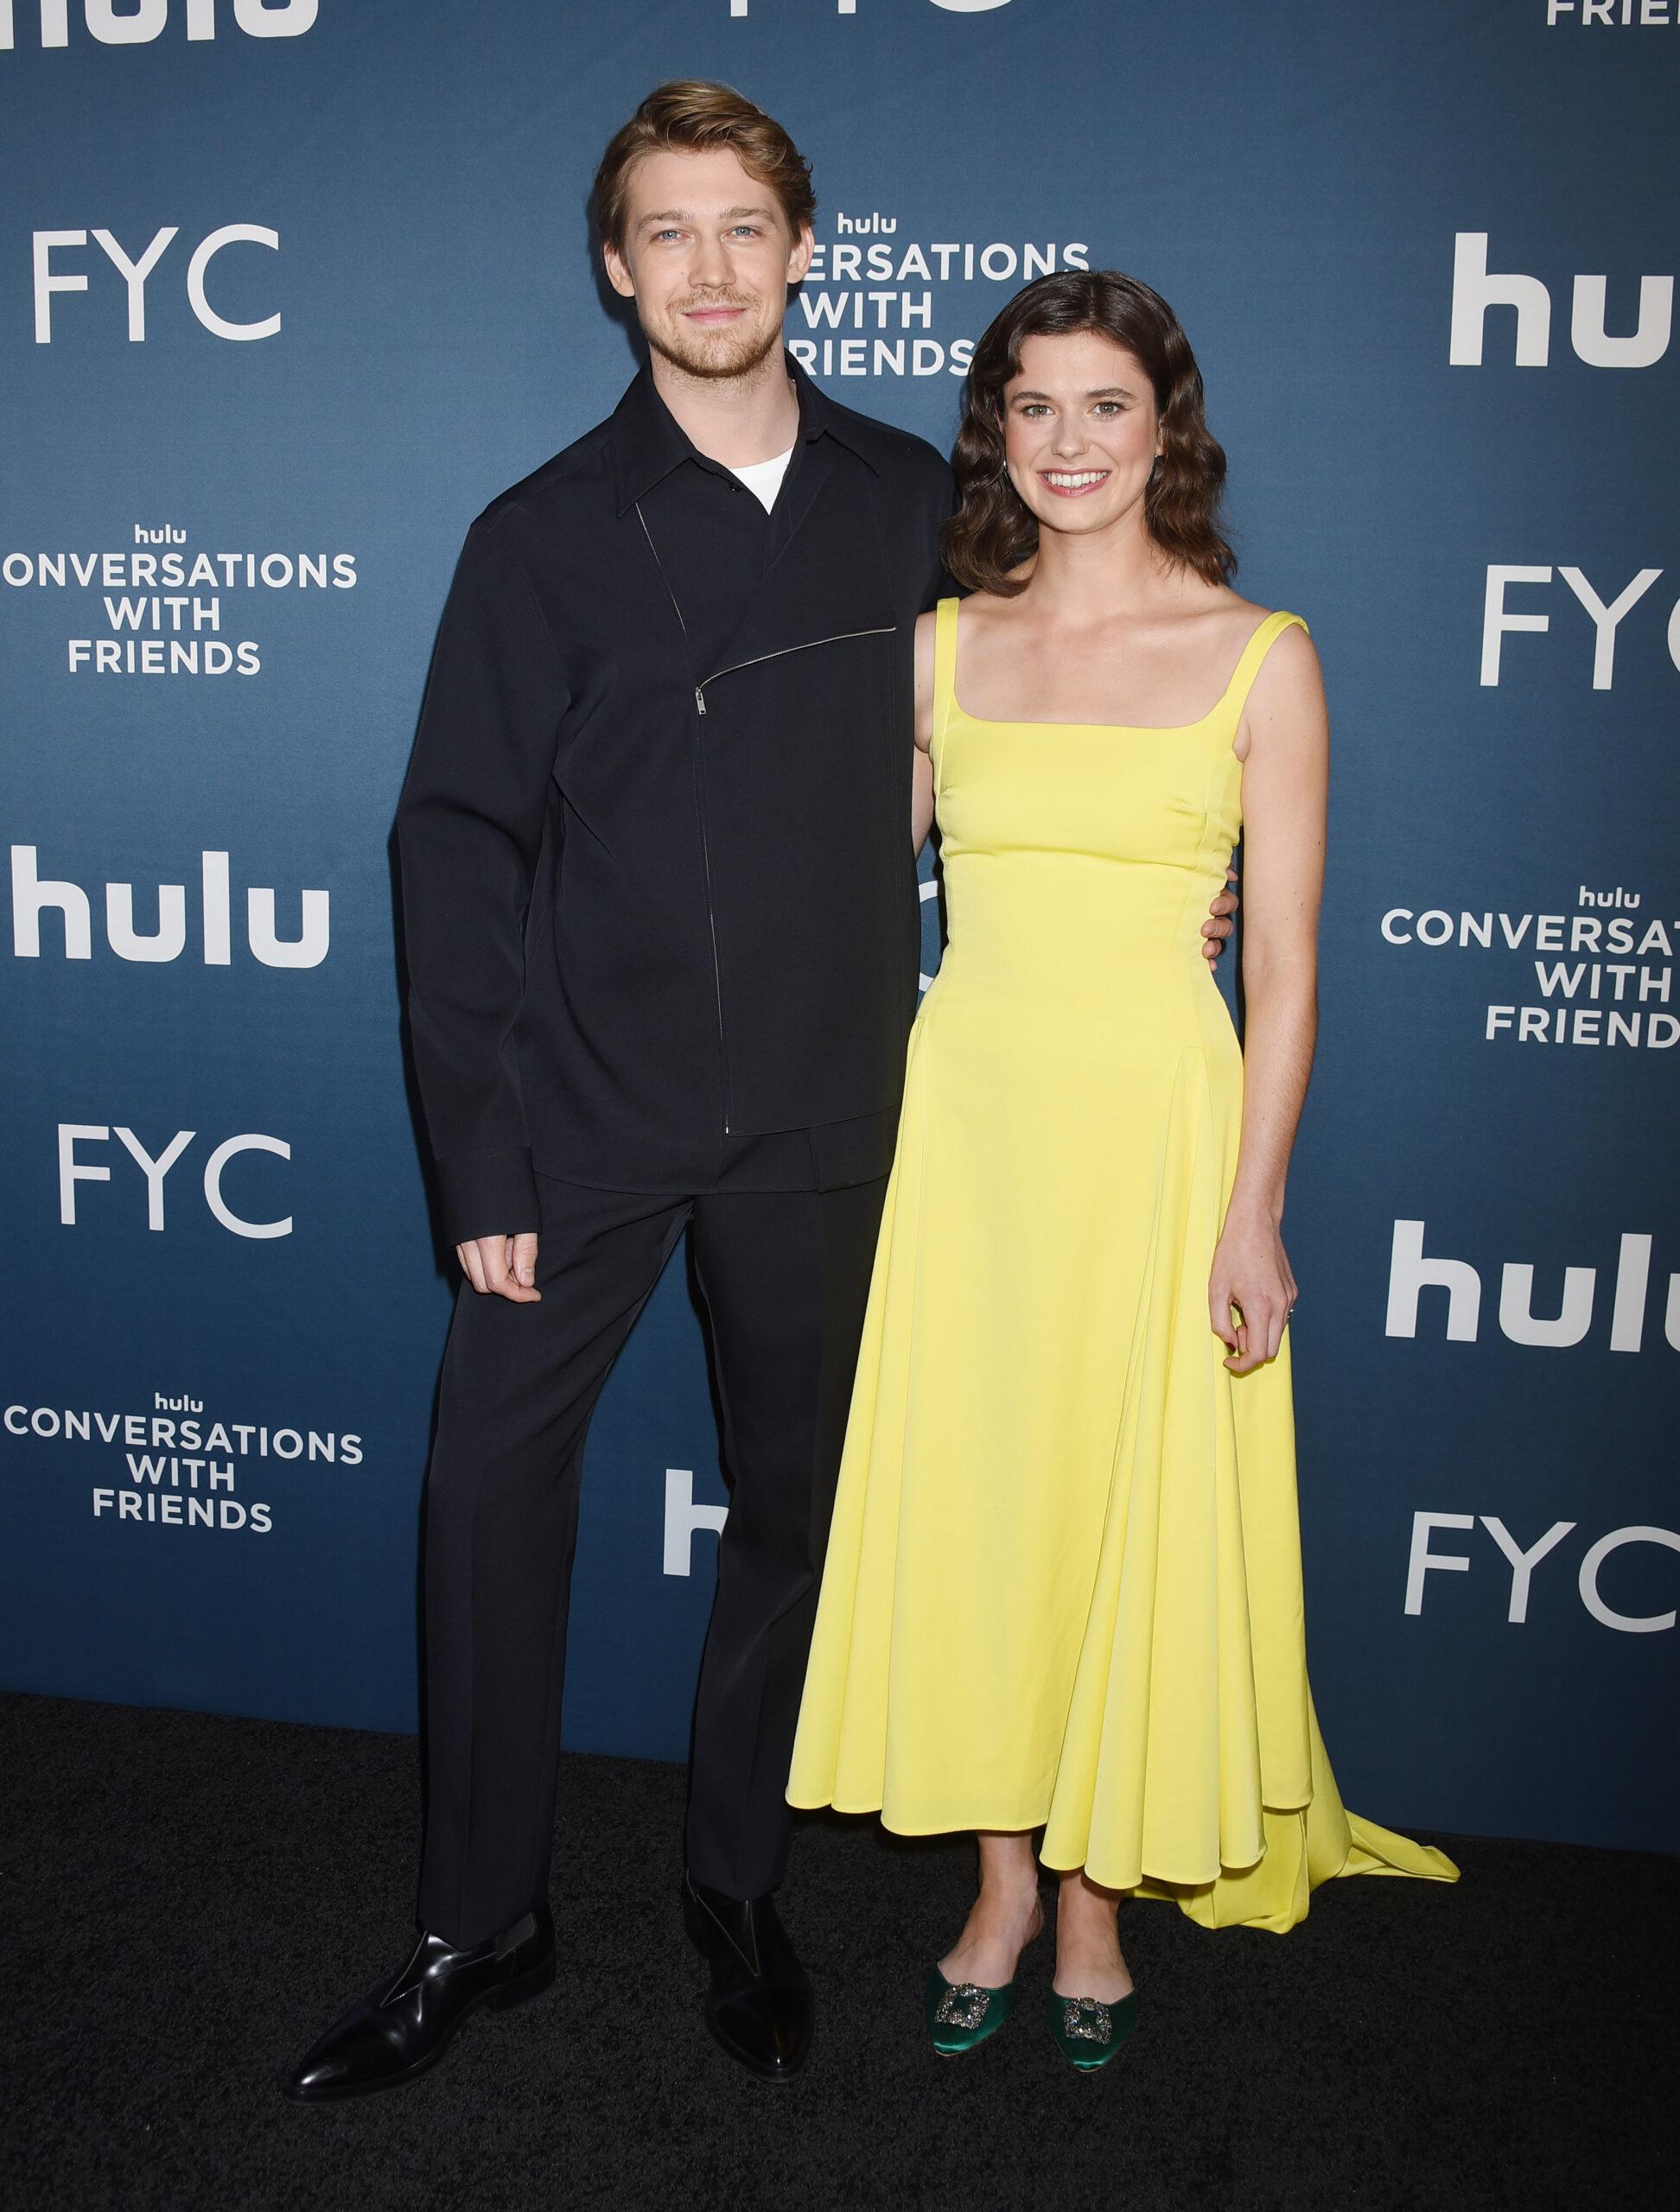 Hulu's Conversations With Friends FYC Event